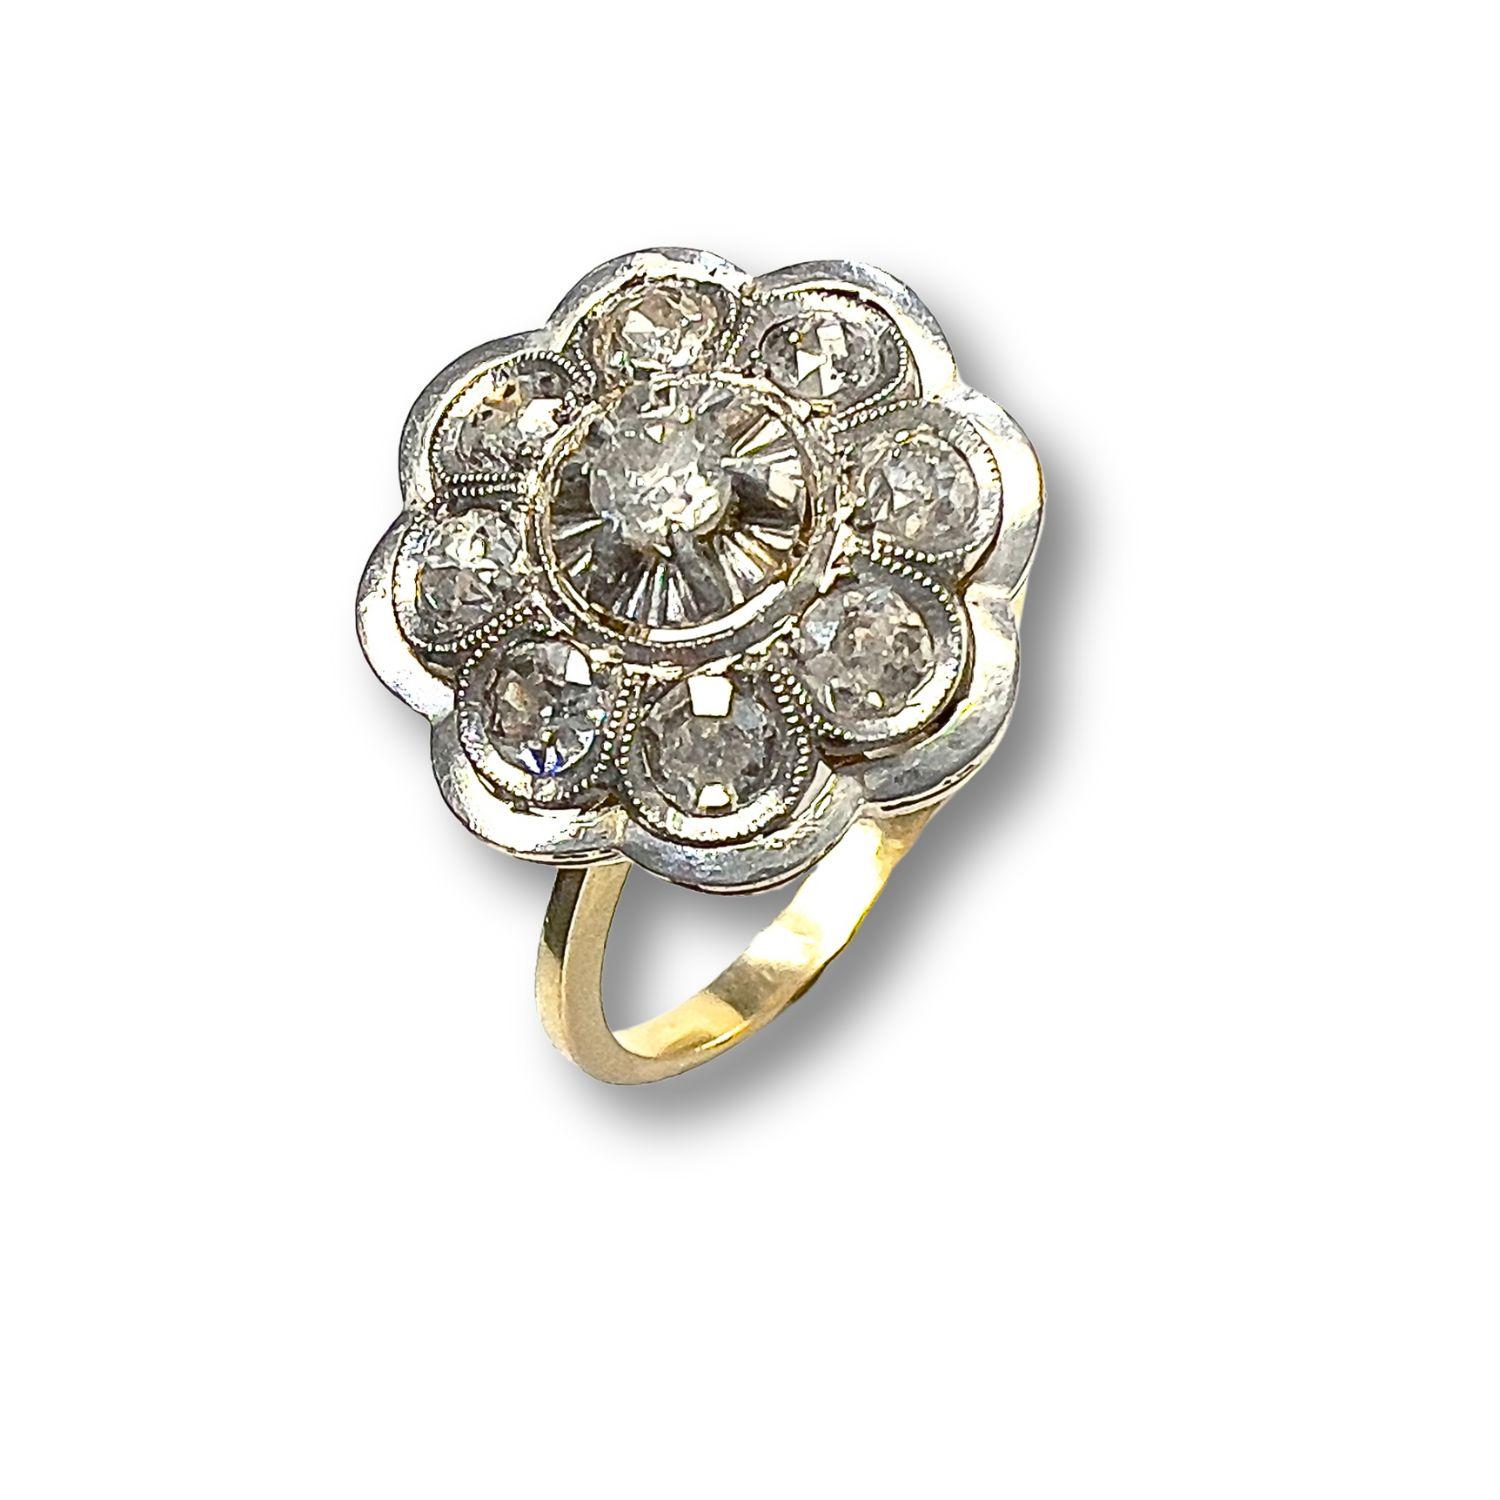 Indulge in the timeless elegance of the Art Deco era with this exquisite 18-karat yellow gold ring adorned with antique cut diamonds. Dating back to the 1930s, this ring is a true testament to the glamour and sophistication of its era.
What sets